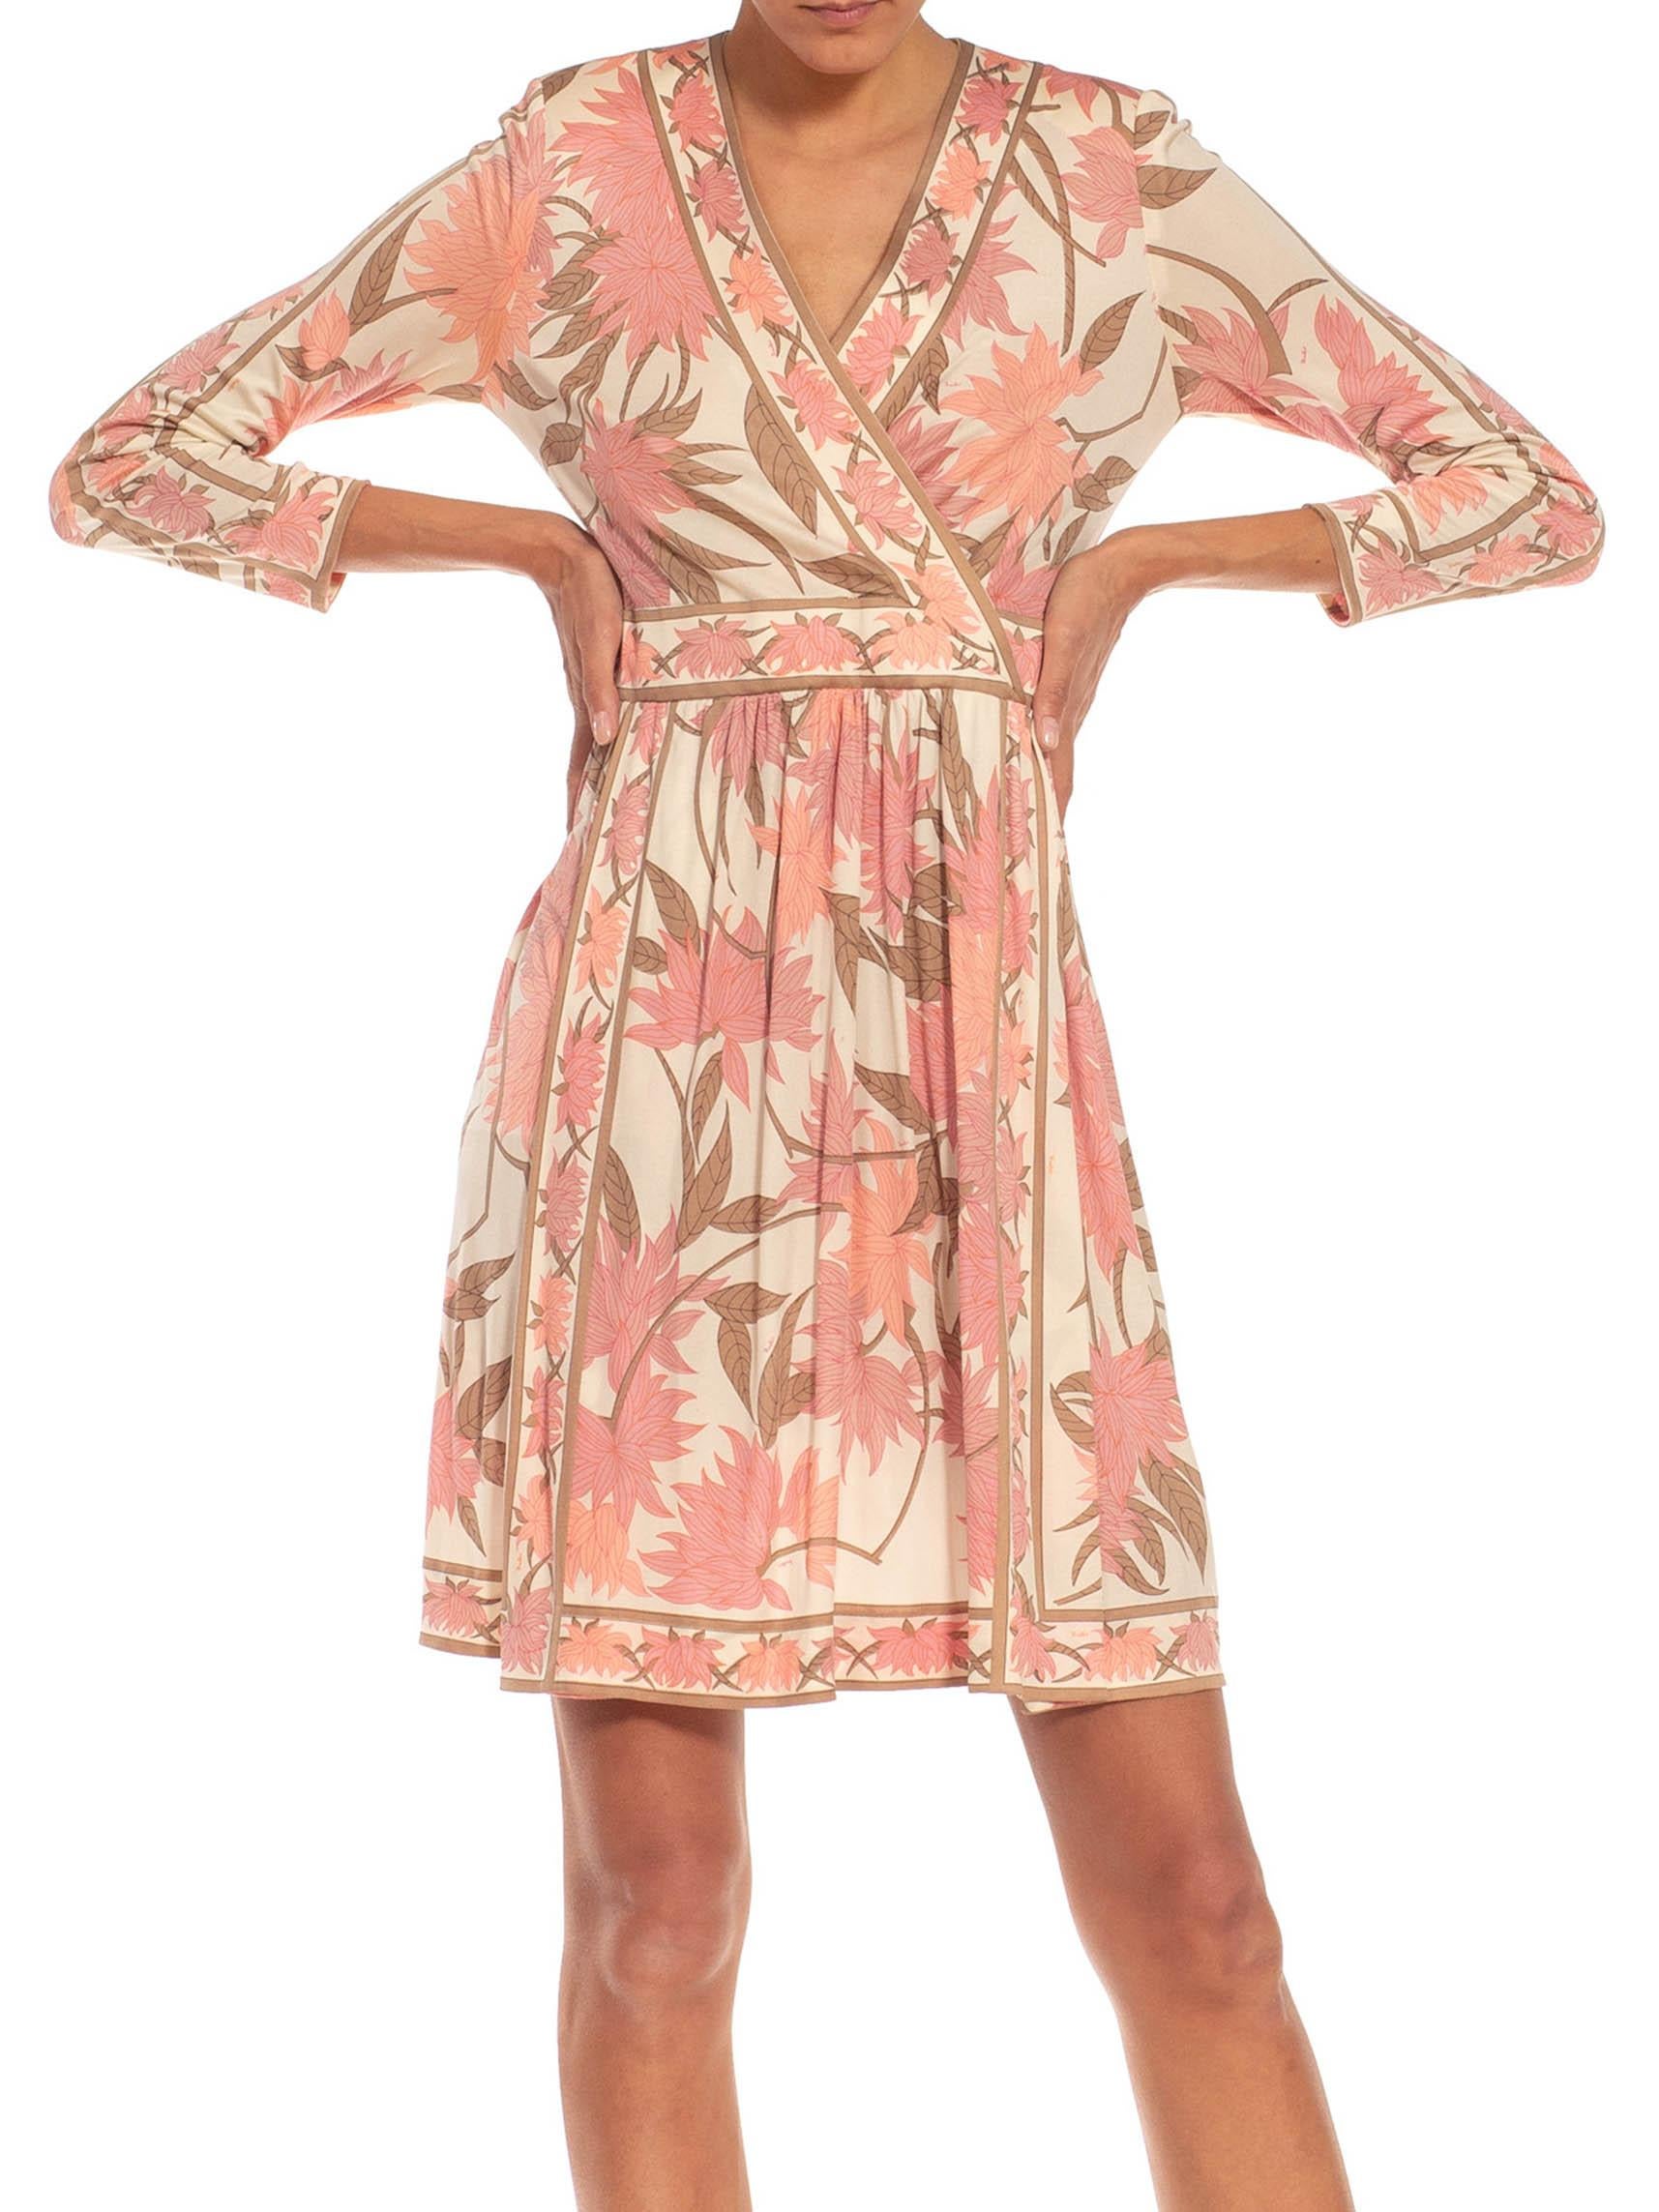 1970S EMILIO PUCCI Cream, Brown & Pink Floral Silk Rayon Blend Signed Dress For Sale 5